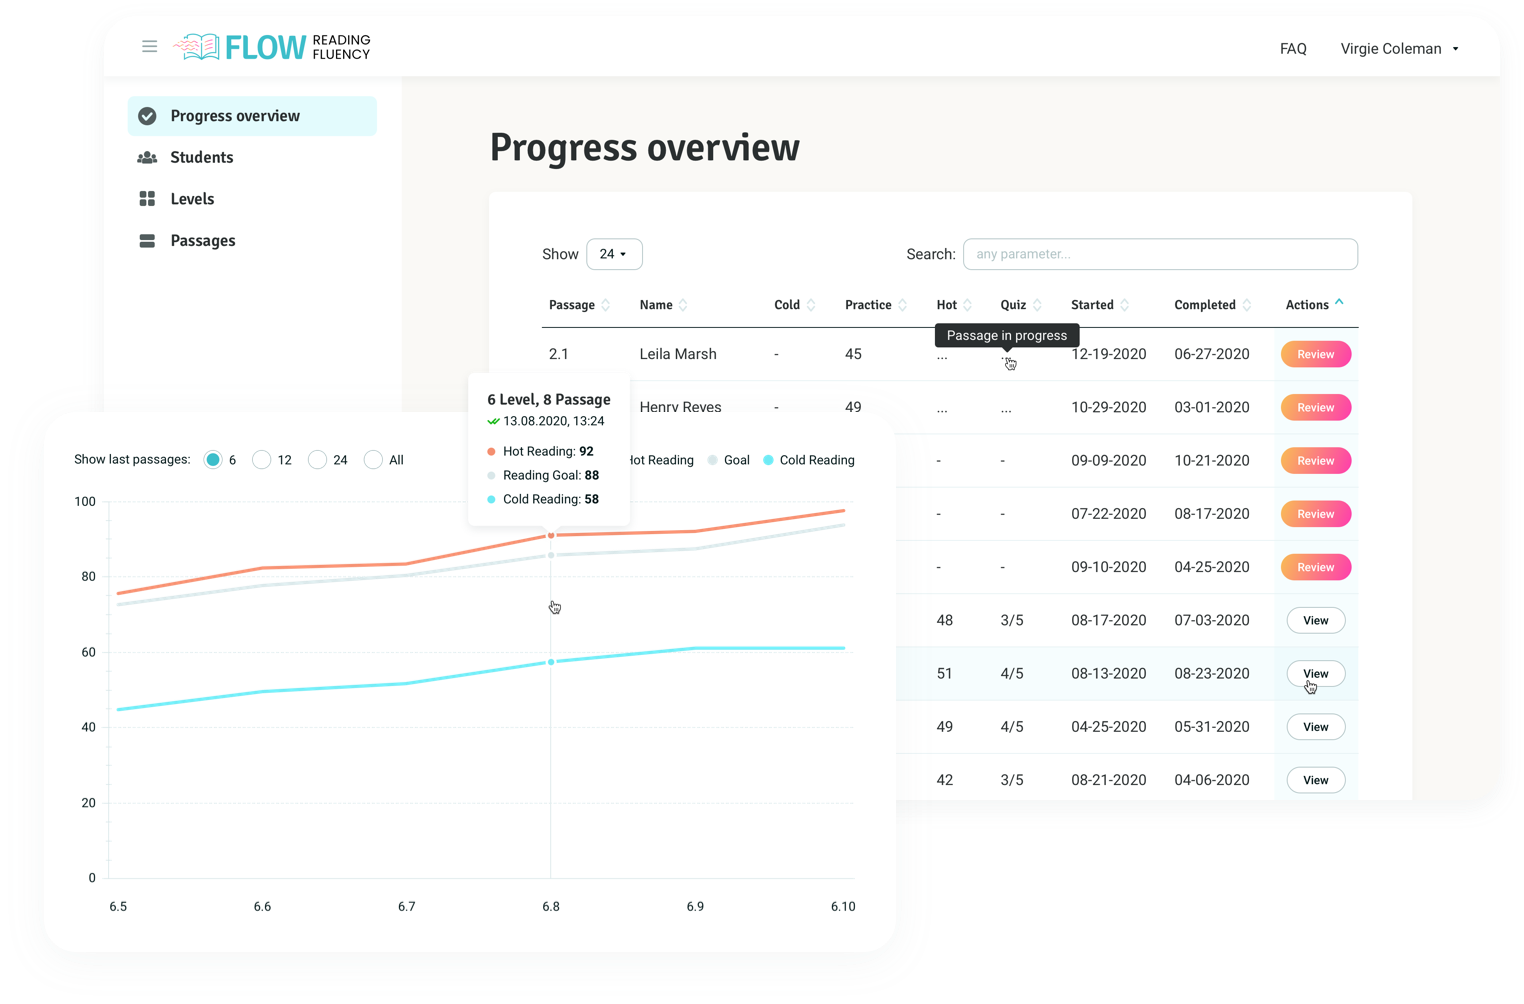 Progress overview data and graphs